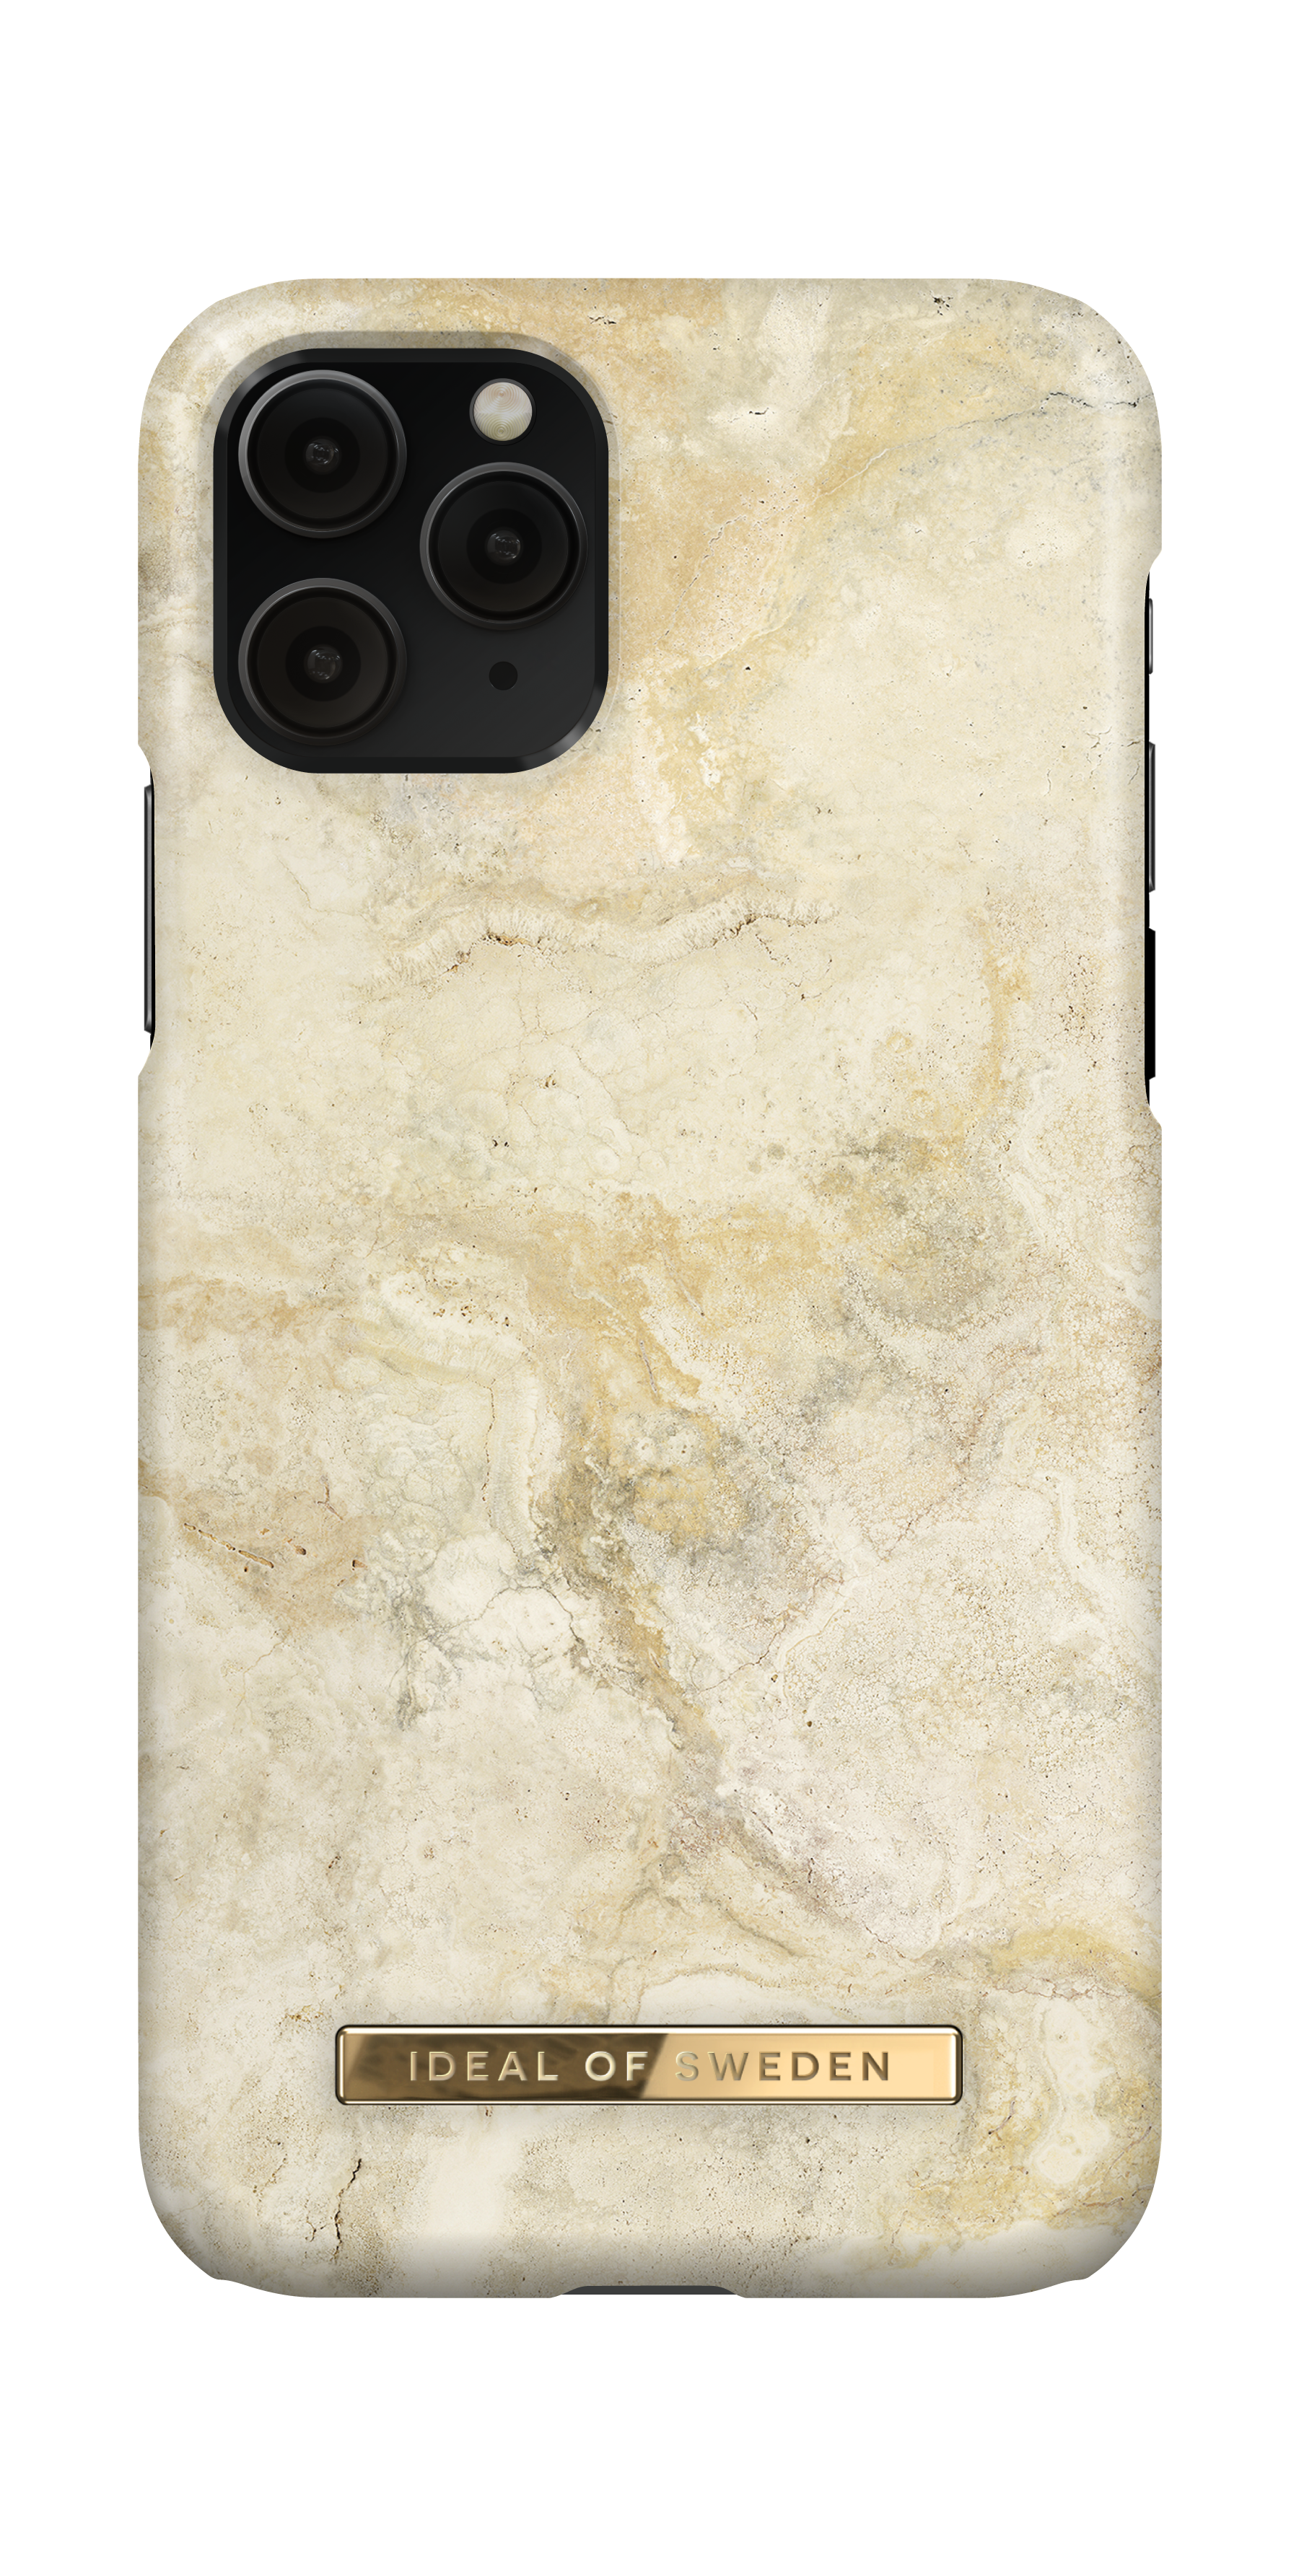 Pro, SWEDEN Backcover, IDEAL OF iPhone iPhone XS, X, Marble iPhone 11 IDFCSS20-I1958-195, Sandstorm Apple,